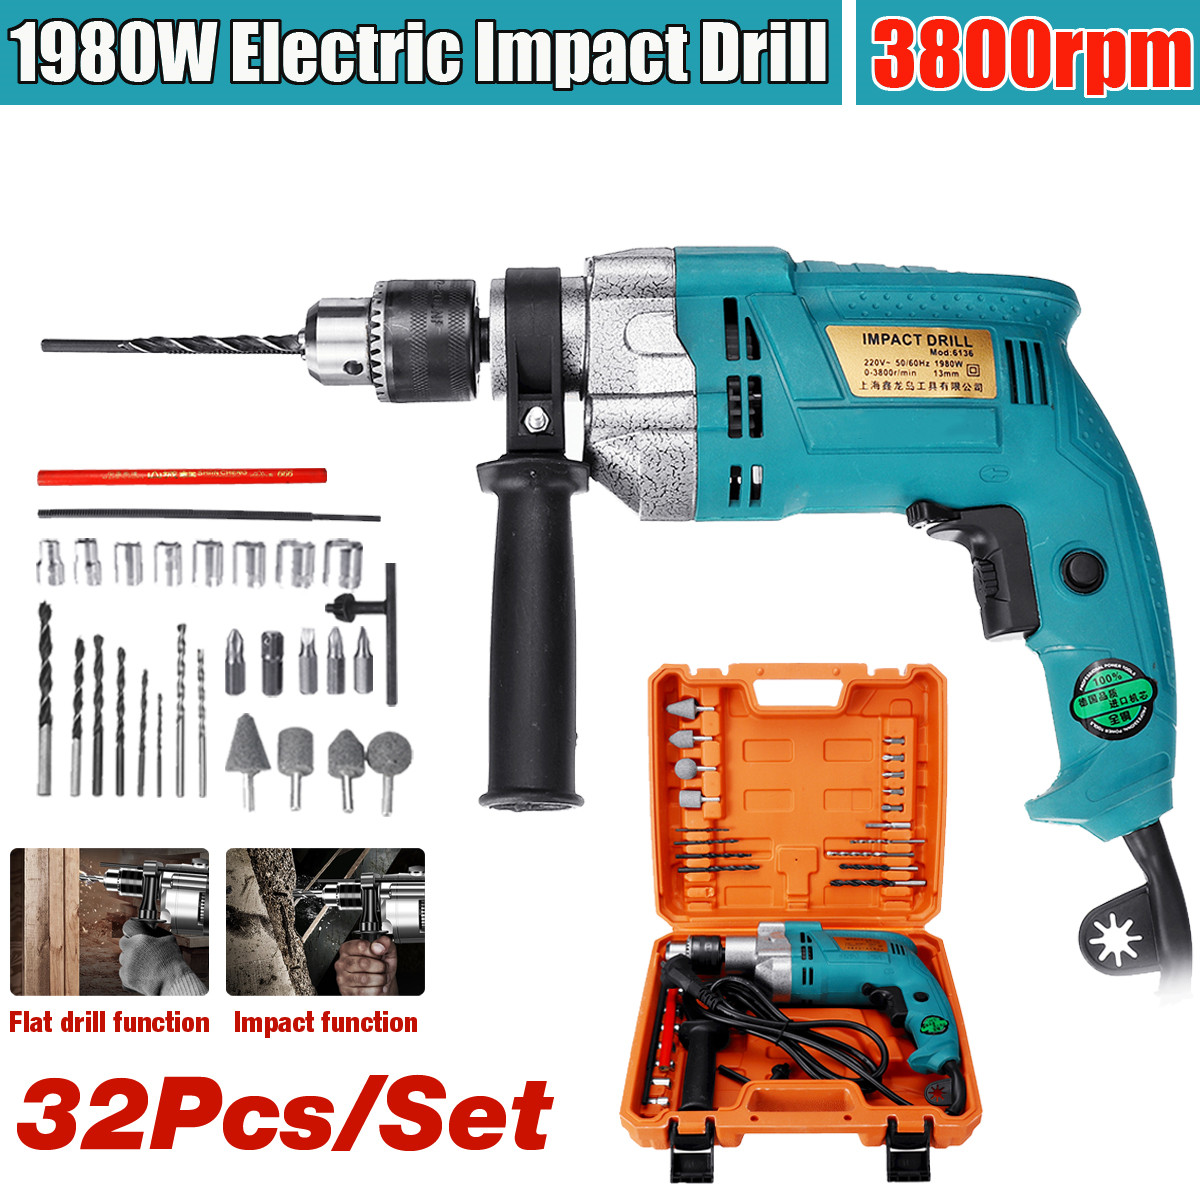 32Pcs-Set-1980W-3800RPM-Electric-Impact-Drill-Screwdriver-Household-Electric-Flat-Drill-Grinding-1466059-2